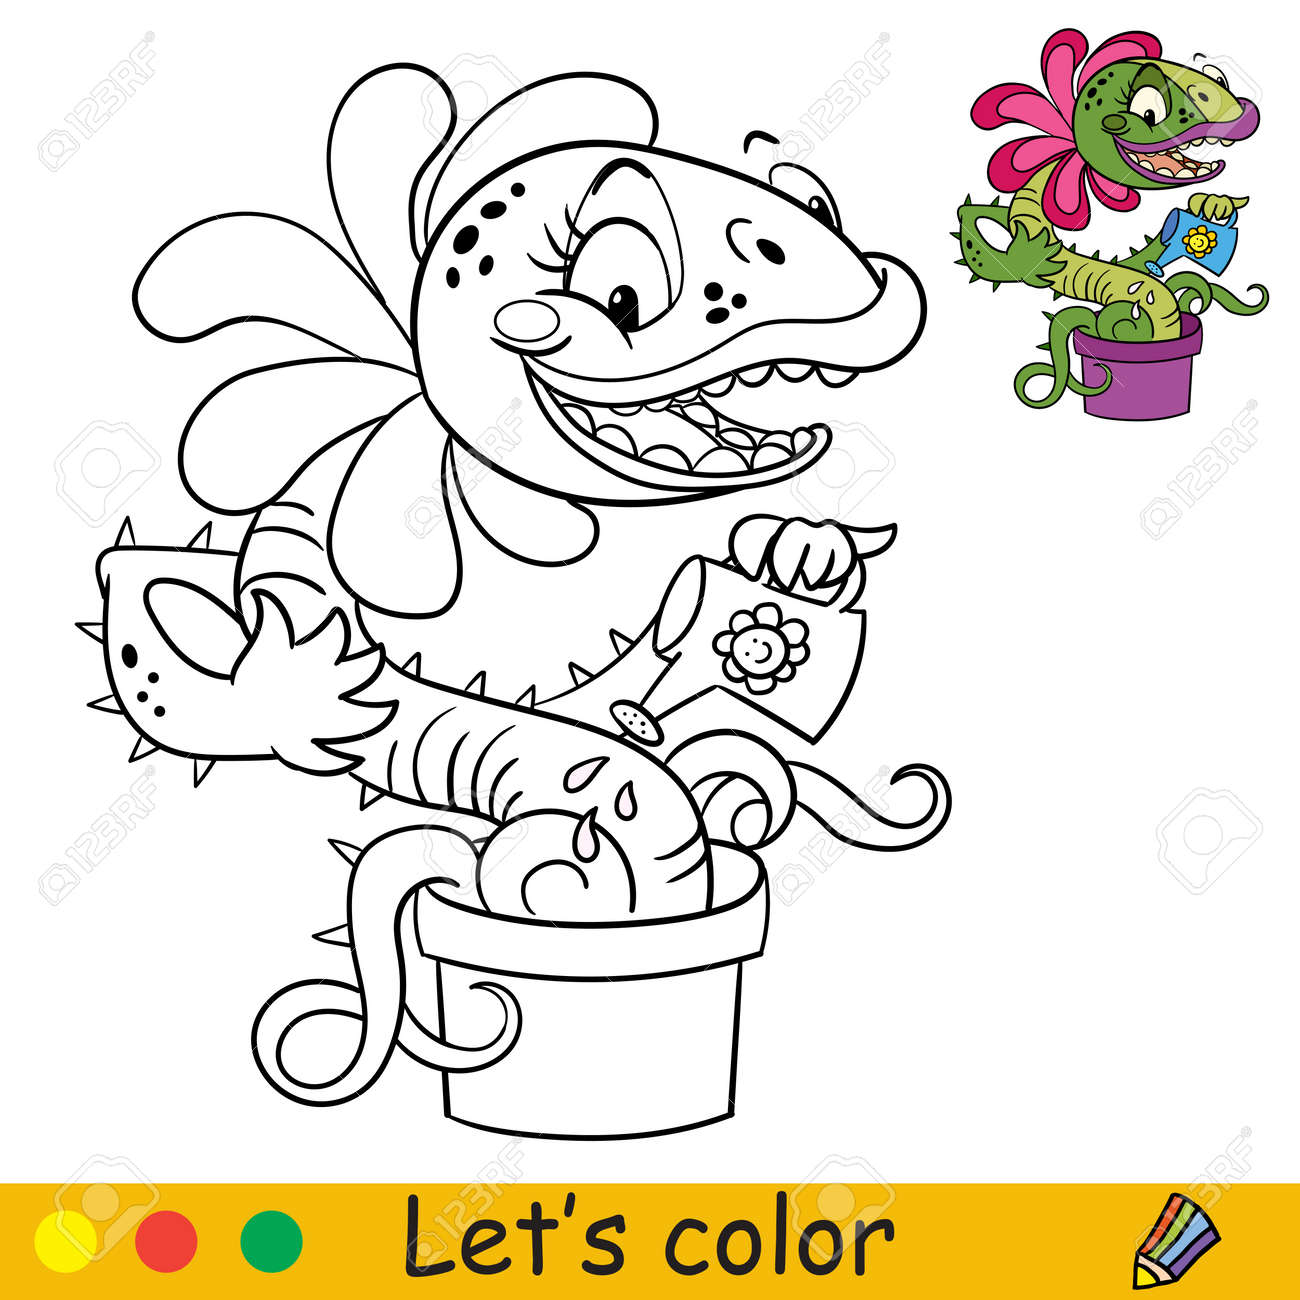 Cute funny carnivorous plant watering himself with a watering can coloring book page with colorful template for kids vector isolated illustration for coloring book print game party design royalty free svg cliparts